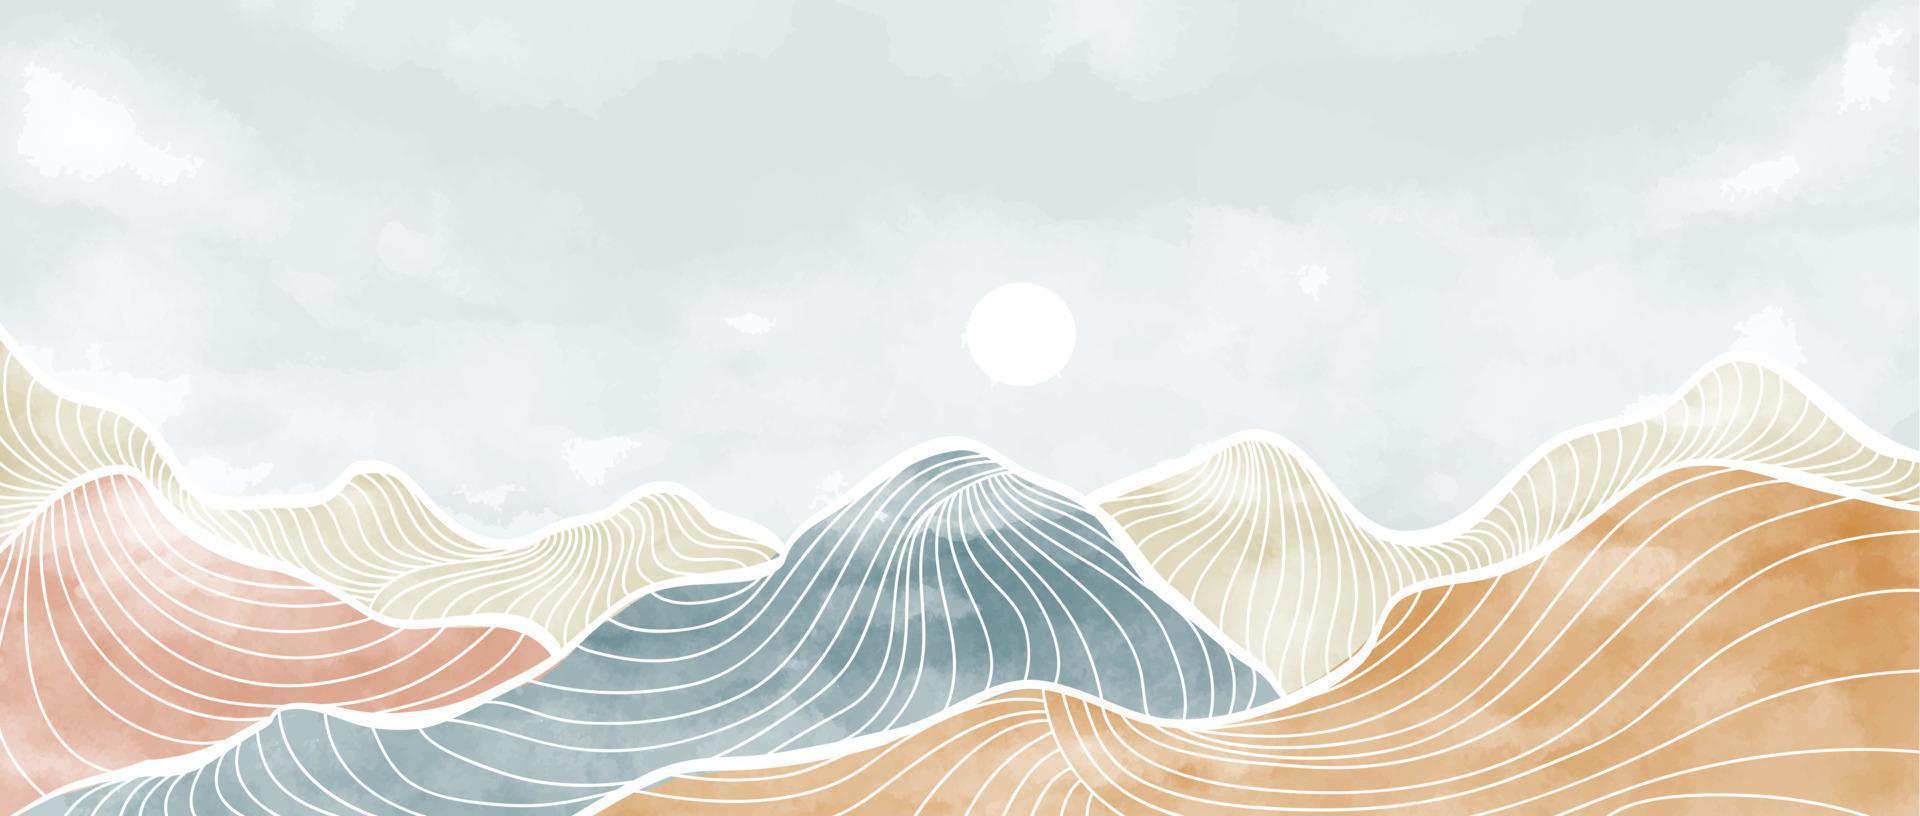 Mountain landscape background with watercolor brush and line wave pattern. Abstract contemporary aesthetic backgrounds landscapes. vector illustrations